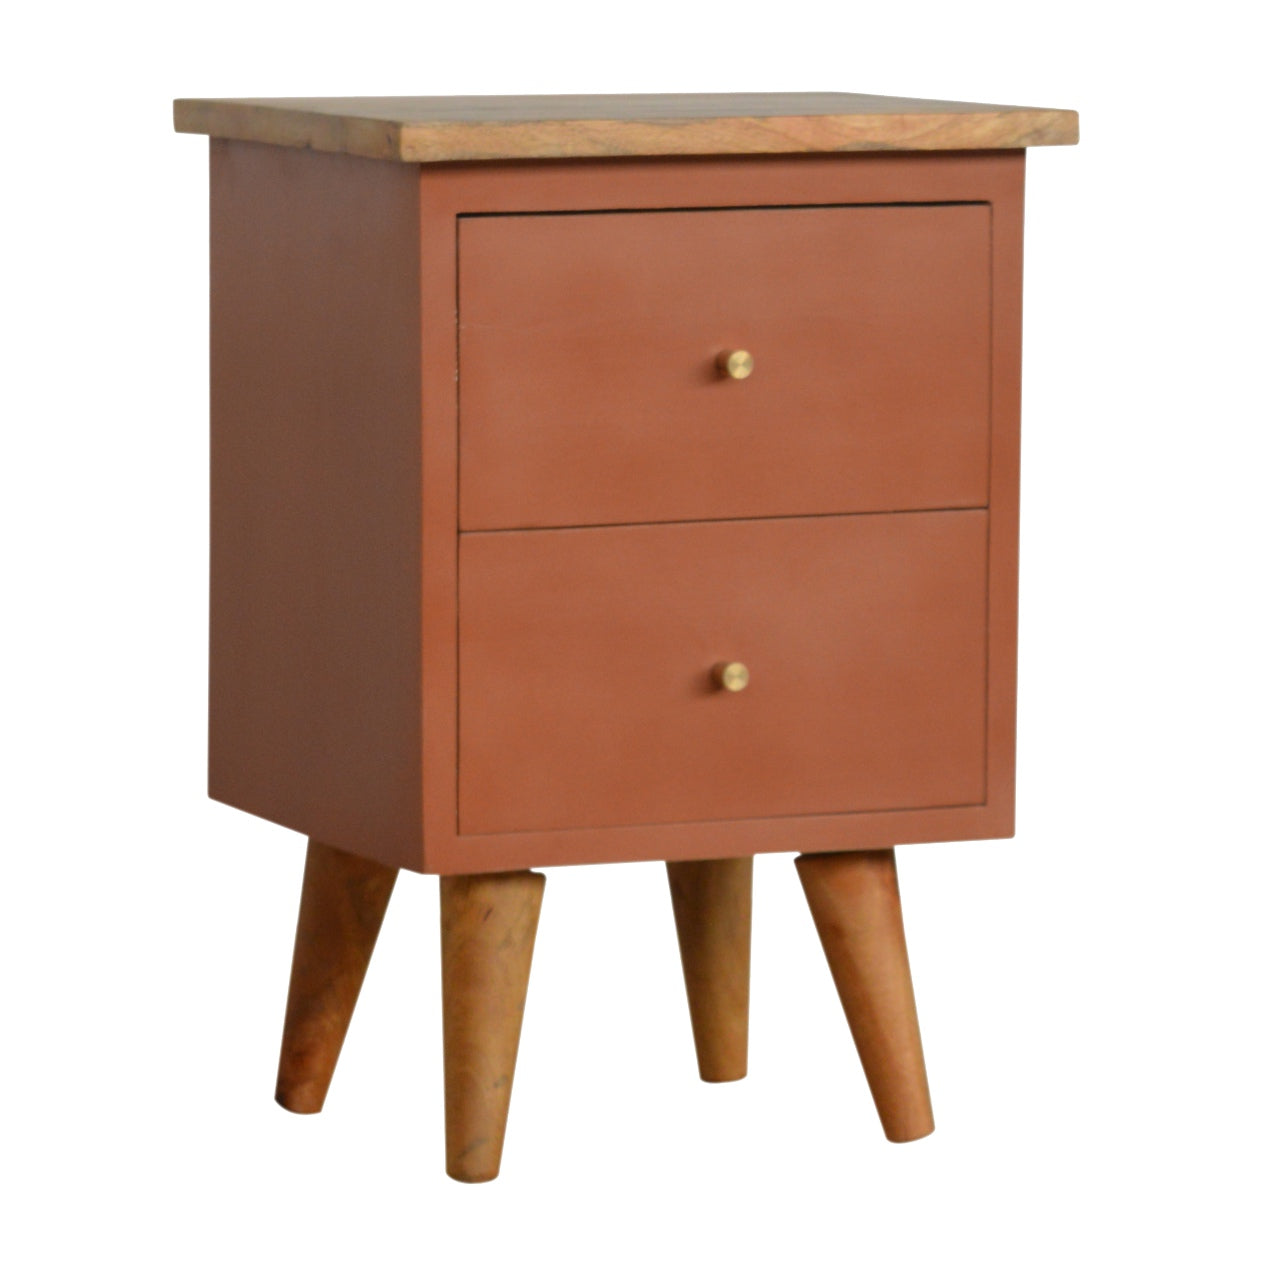 Brick Red Hand Painted Solid Wood Bedside